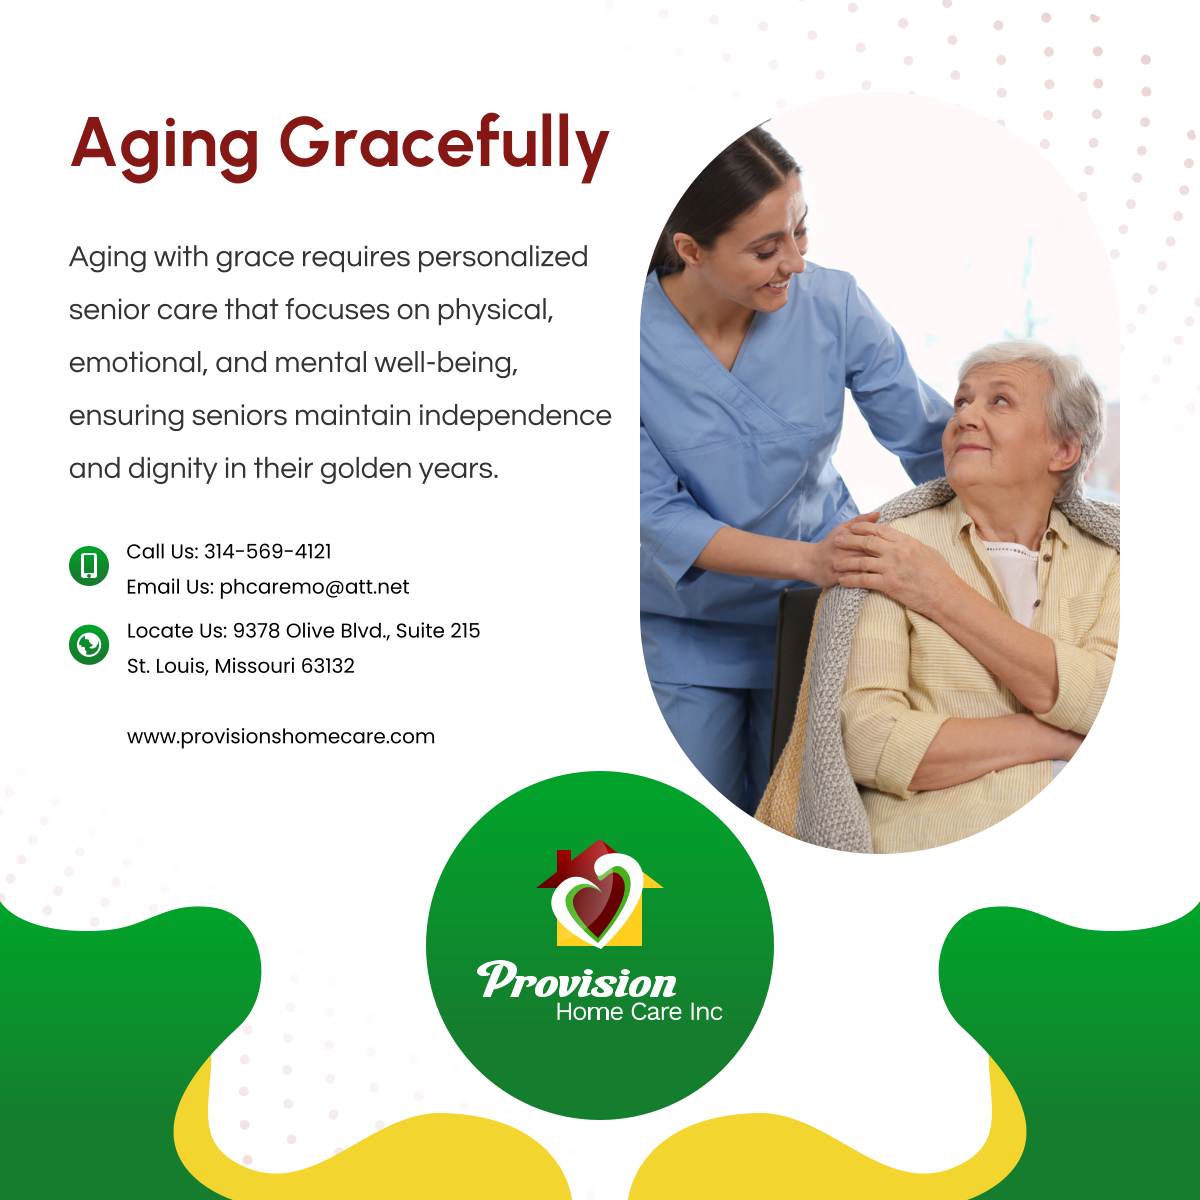 Explore how our senior care services promote wellness in St. Louis, providing personalized support to help seniors age with grace, dignity, and vitality. Learn more at tinyurl.com/5638n2kw. 

#StLouisMO #HomeCareServices #SeniorWellness #PromoteWellness #AgingGracefully